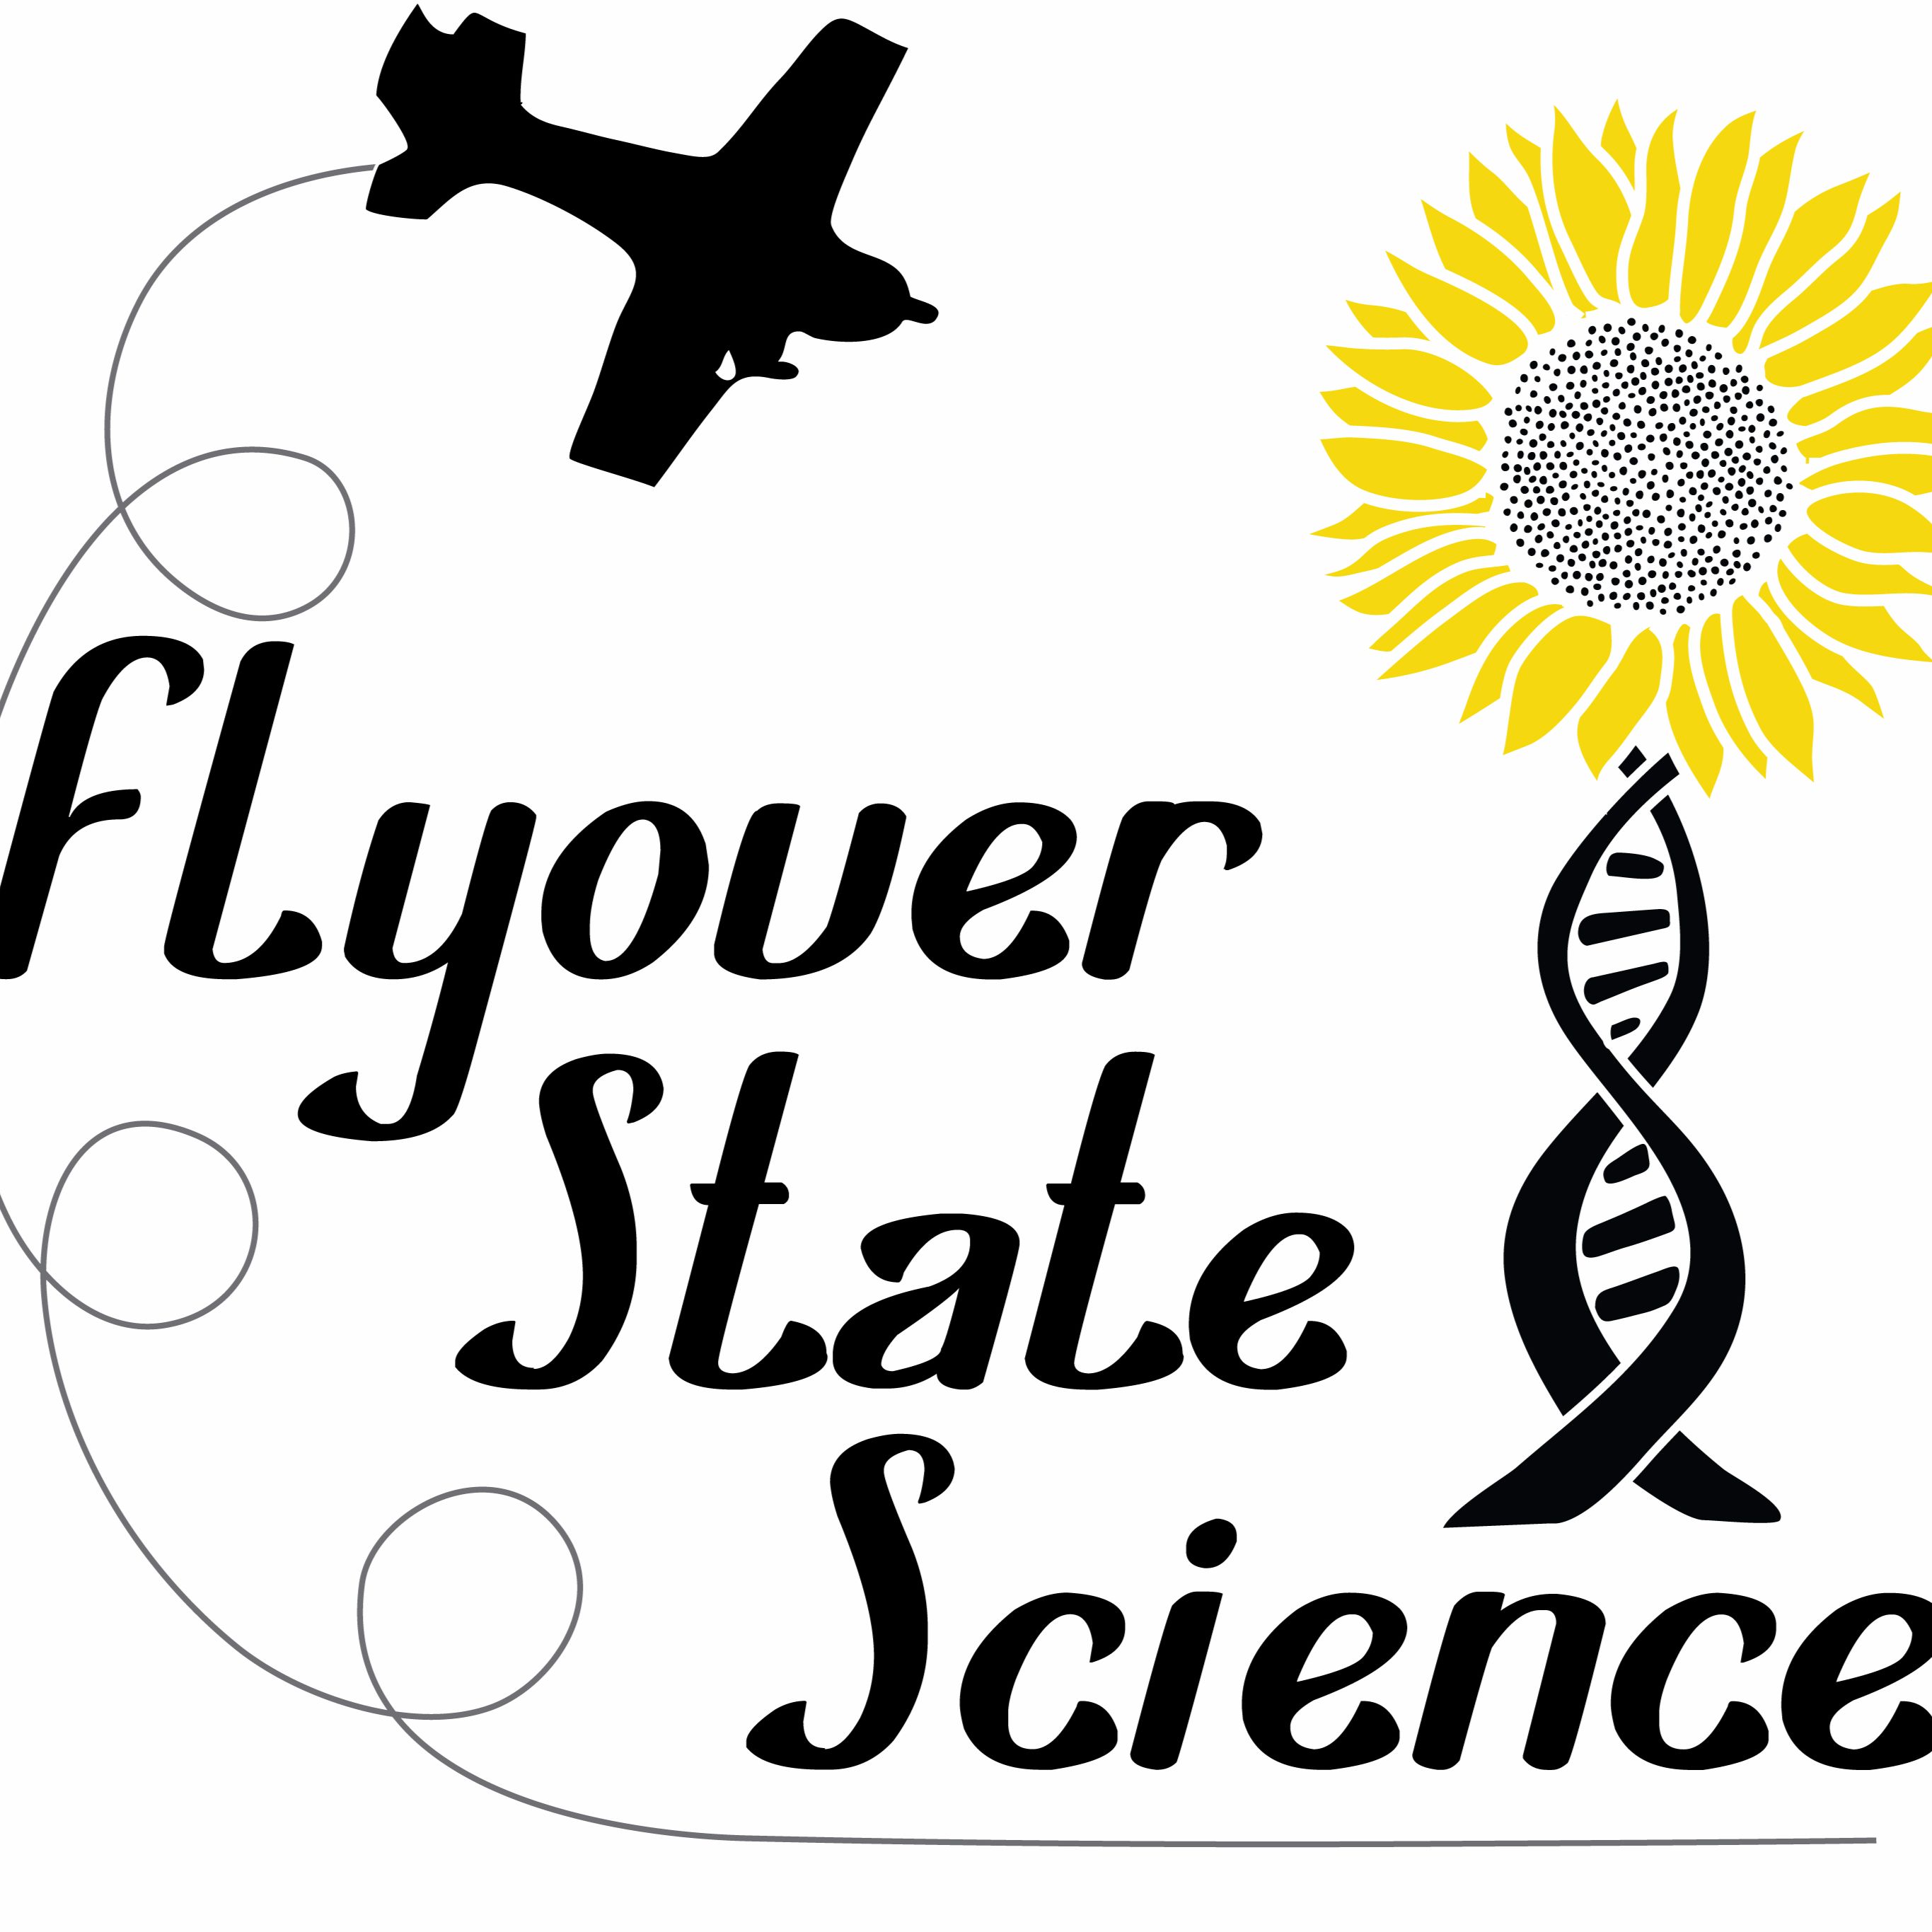 Flyover State Science